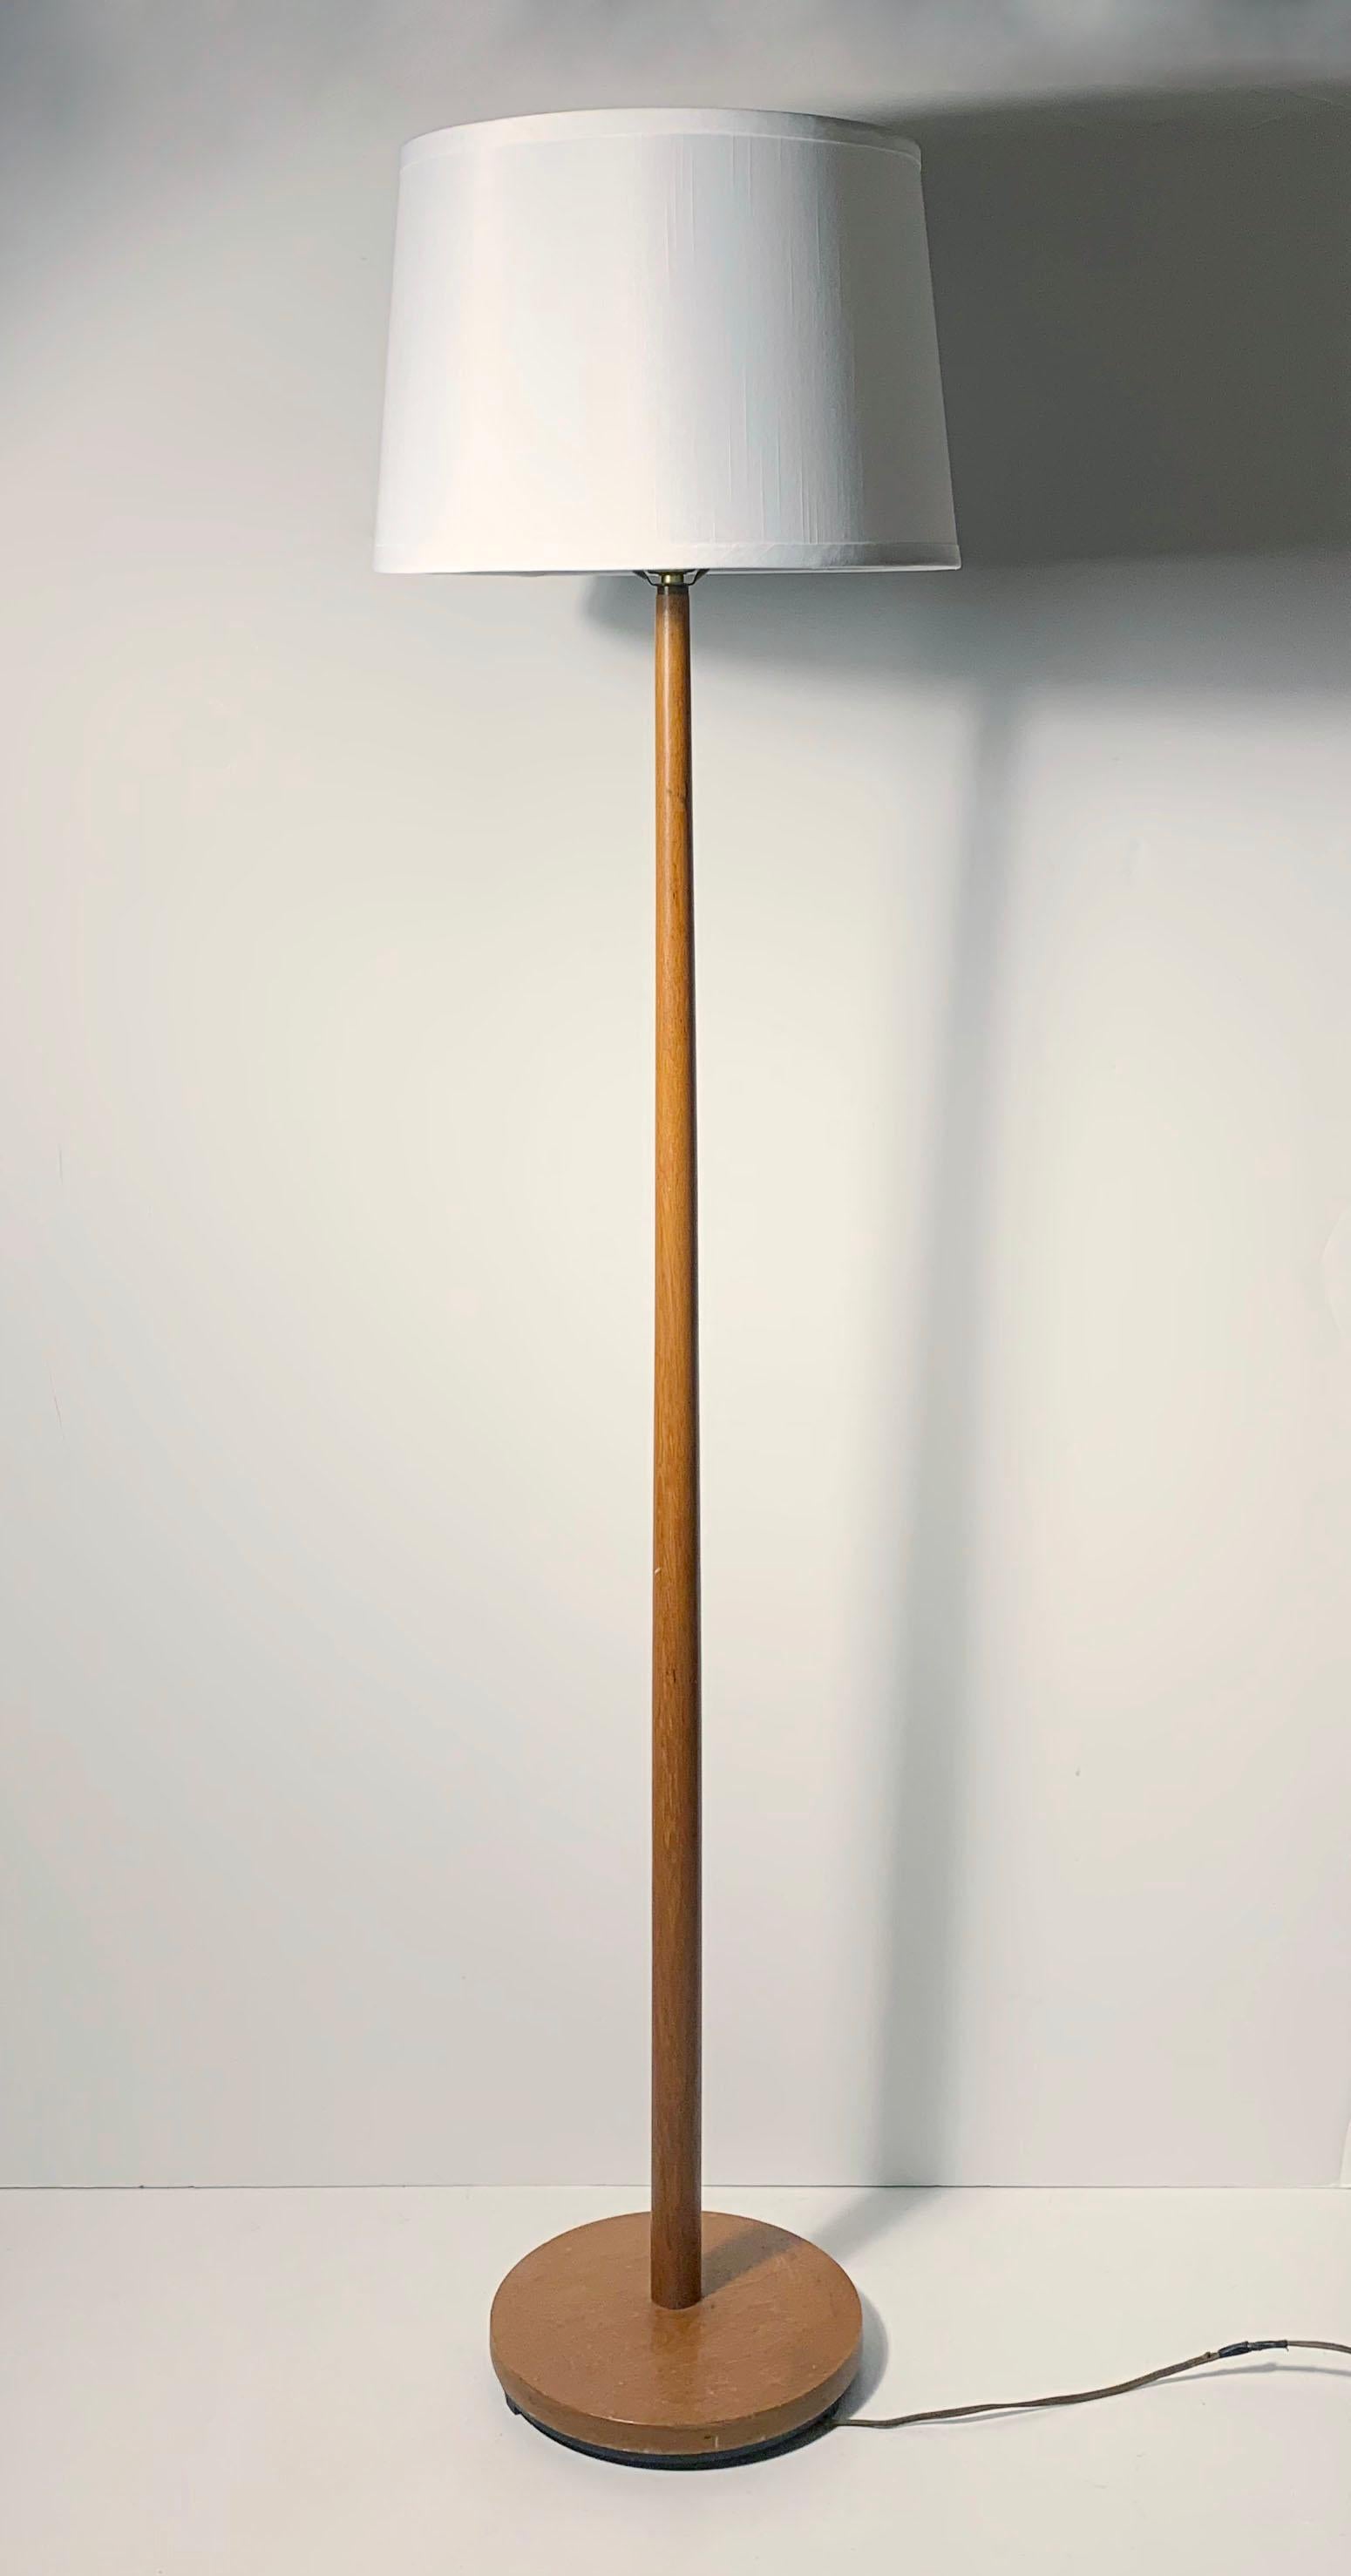 Teak floor lamp made in Sweden for Kovacs

Sold sans shade.
Needs rewiring.

height is to top of finial.